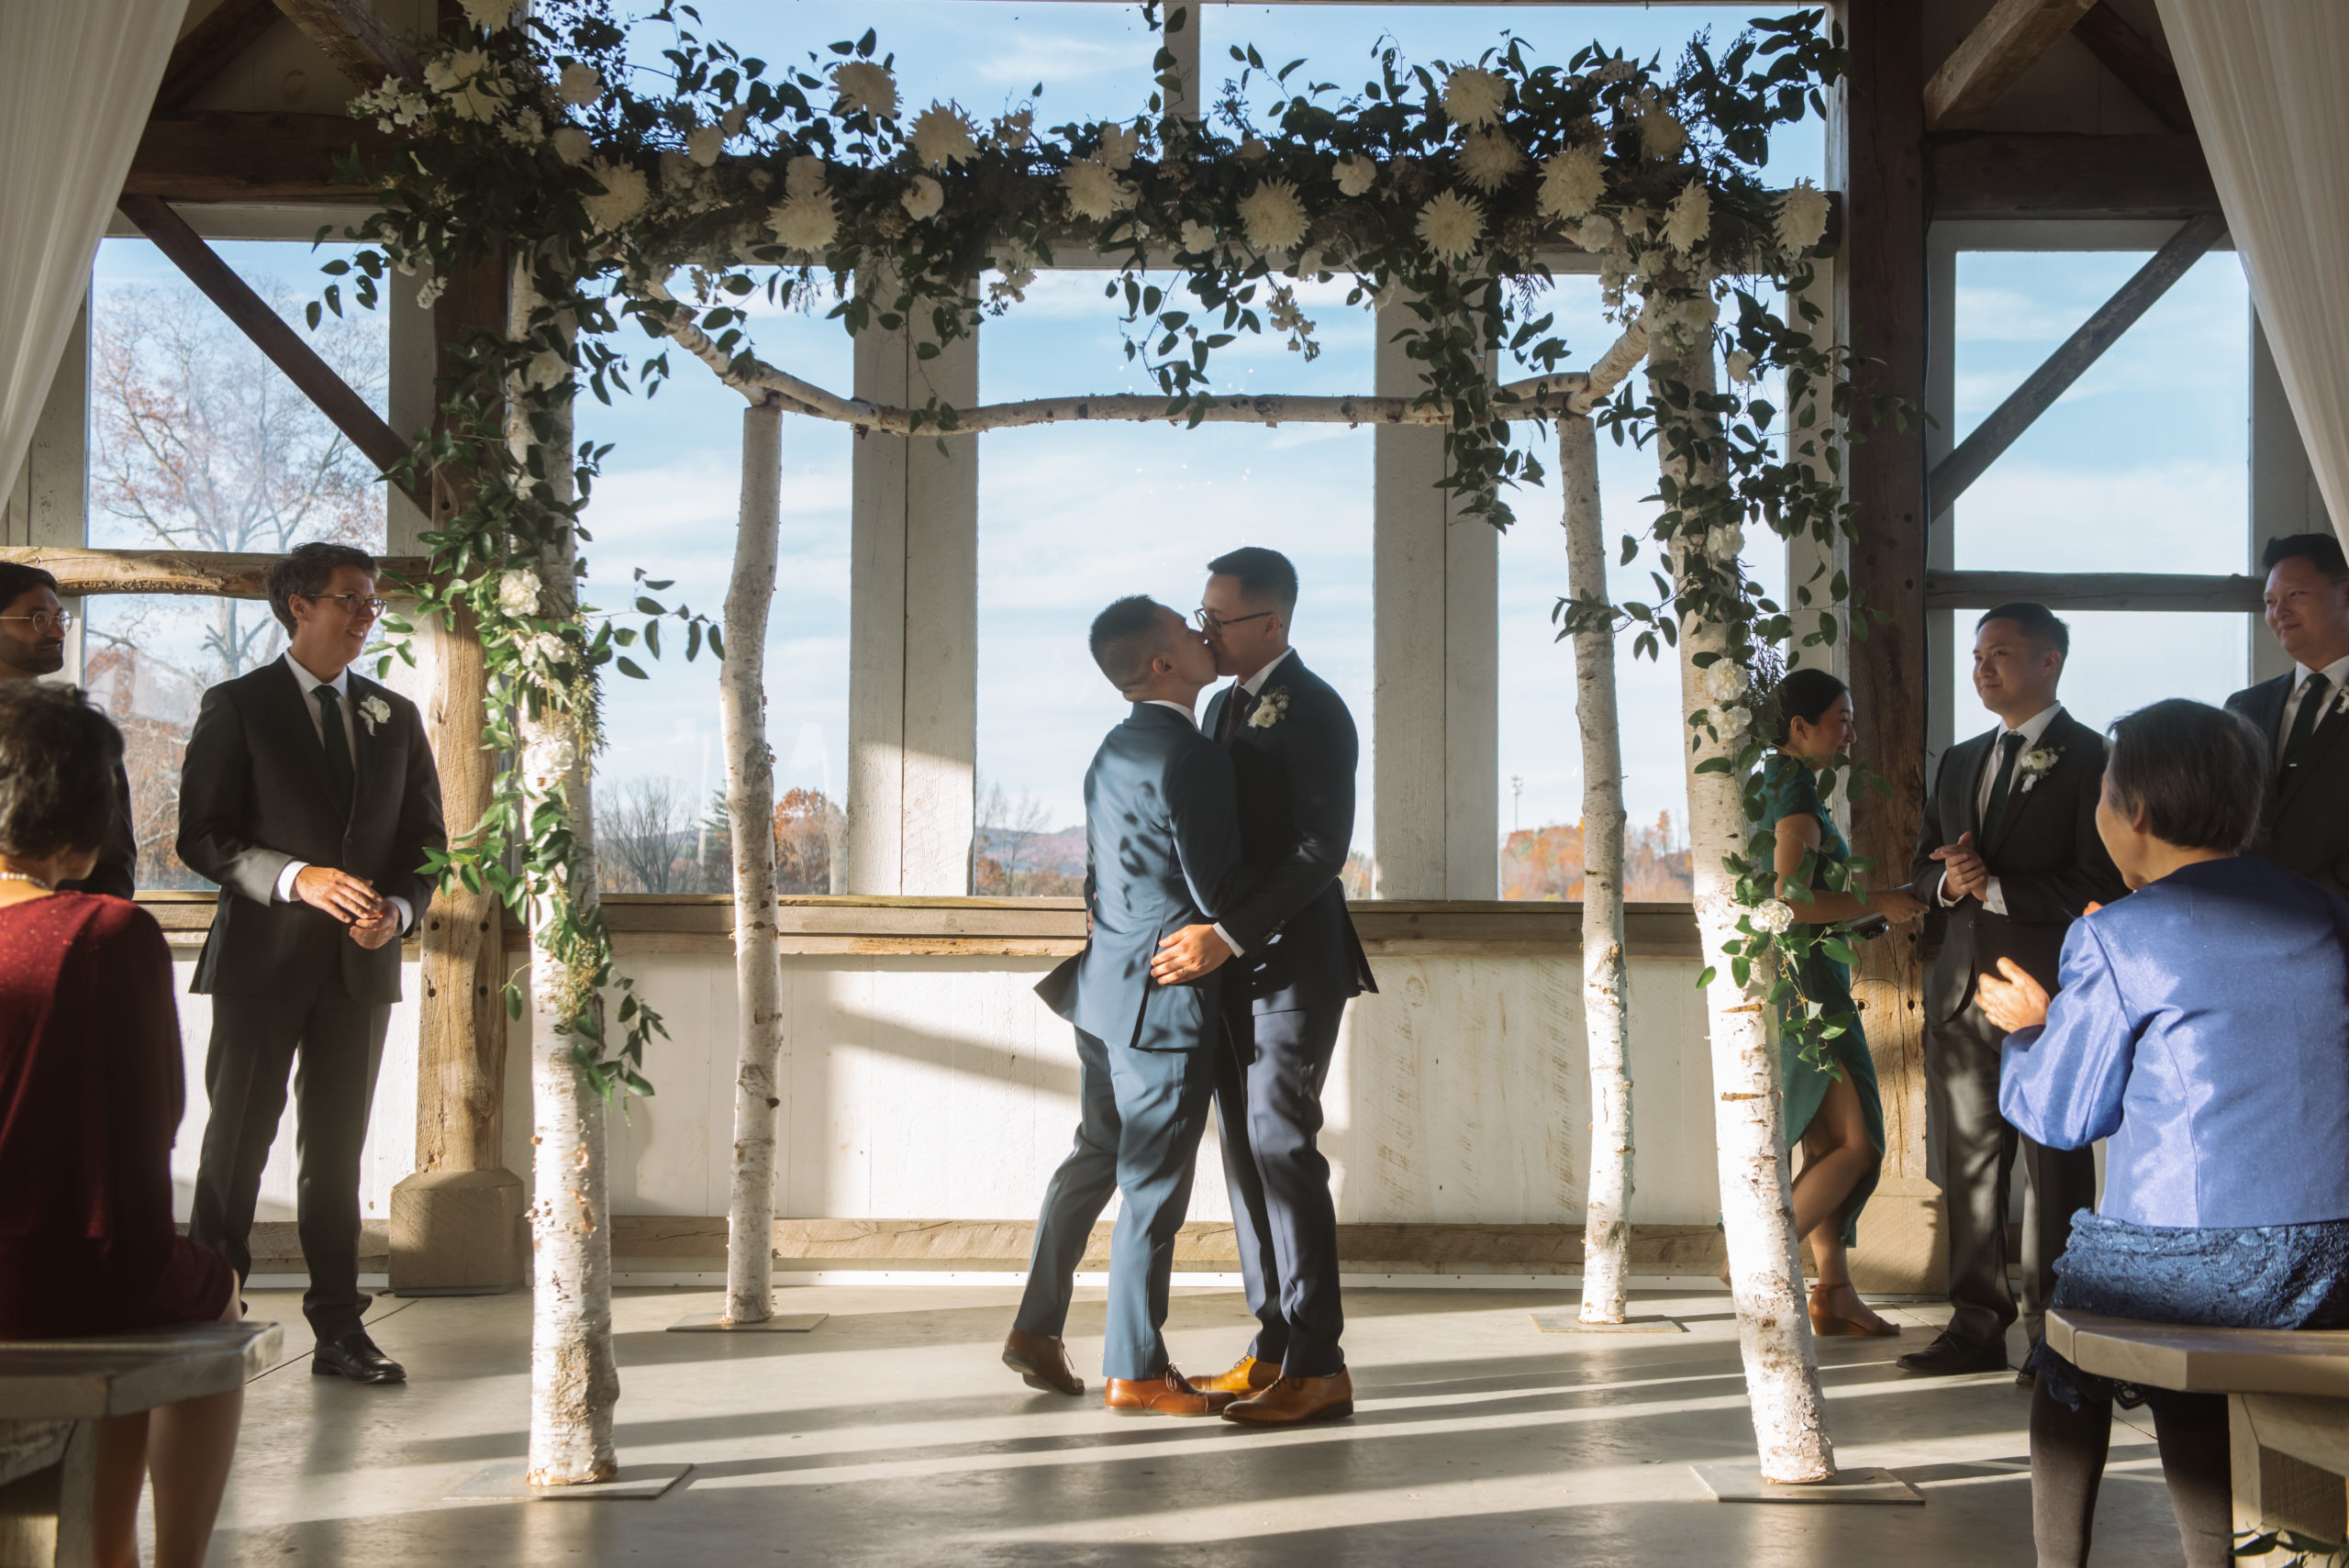 Two grooms kissing at the end of the ceremony. The grooms are dressed in two different shades of dark blue suits. They are surrounded by their wedding party and visible guests are one of the groom's mother and the other groom's grandmother who is clapping. The alter is decorated with birch trees, greenery, and white florals.